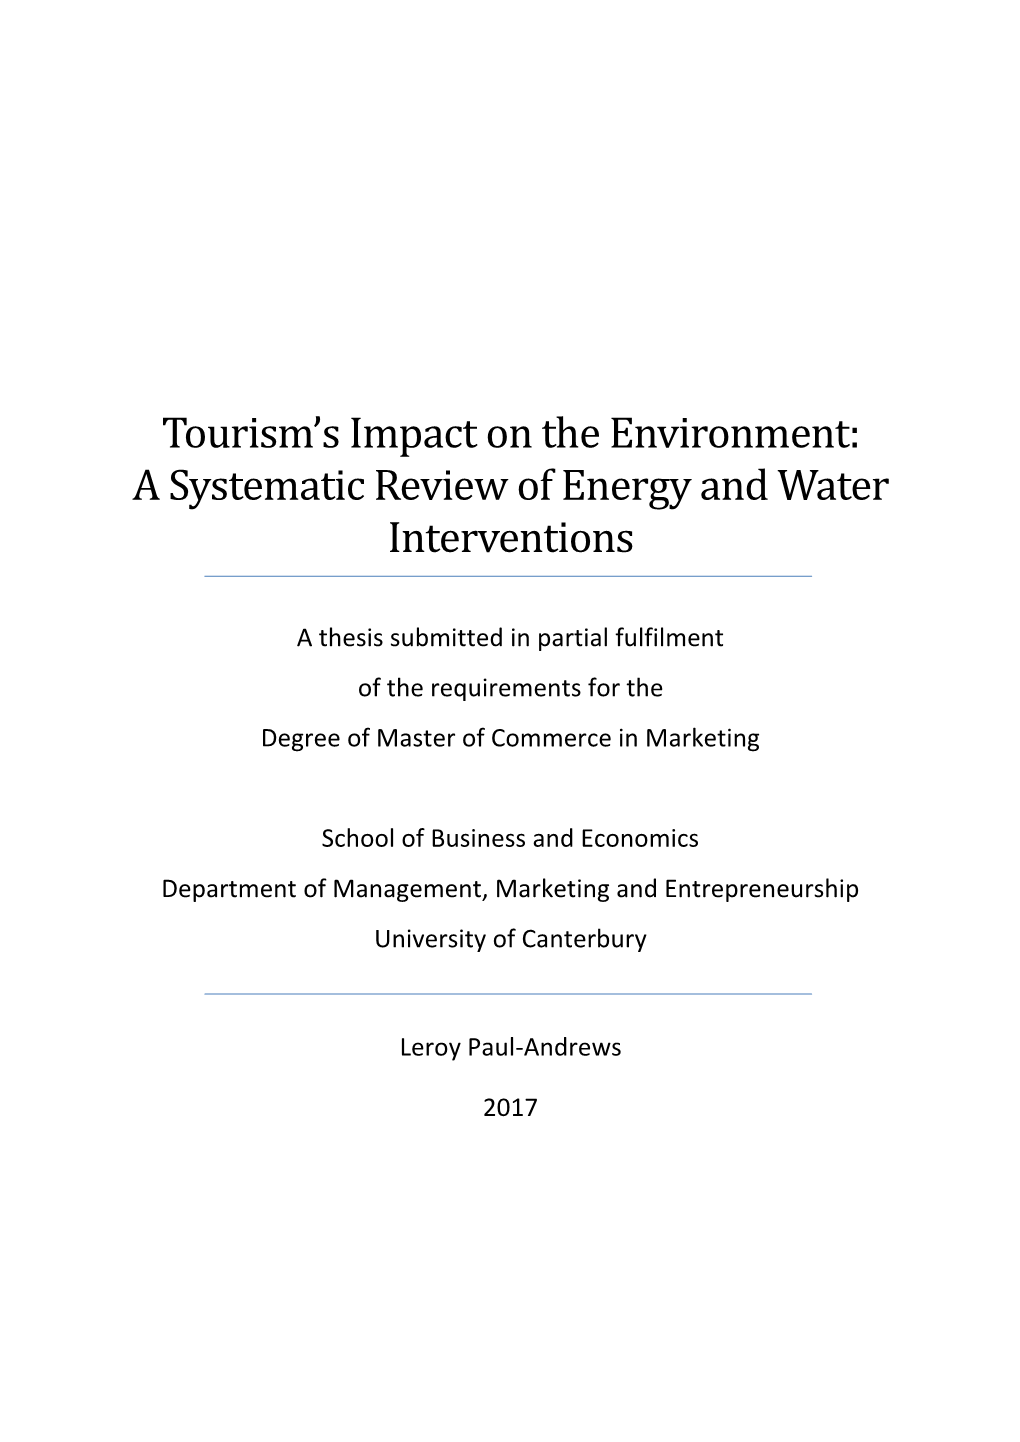 Tourism's Impact on the Environment: a Systematic Review of Energy and Water Interventions